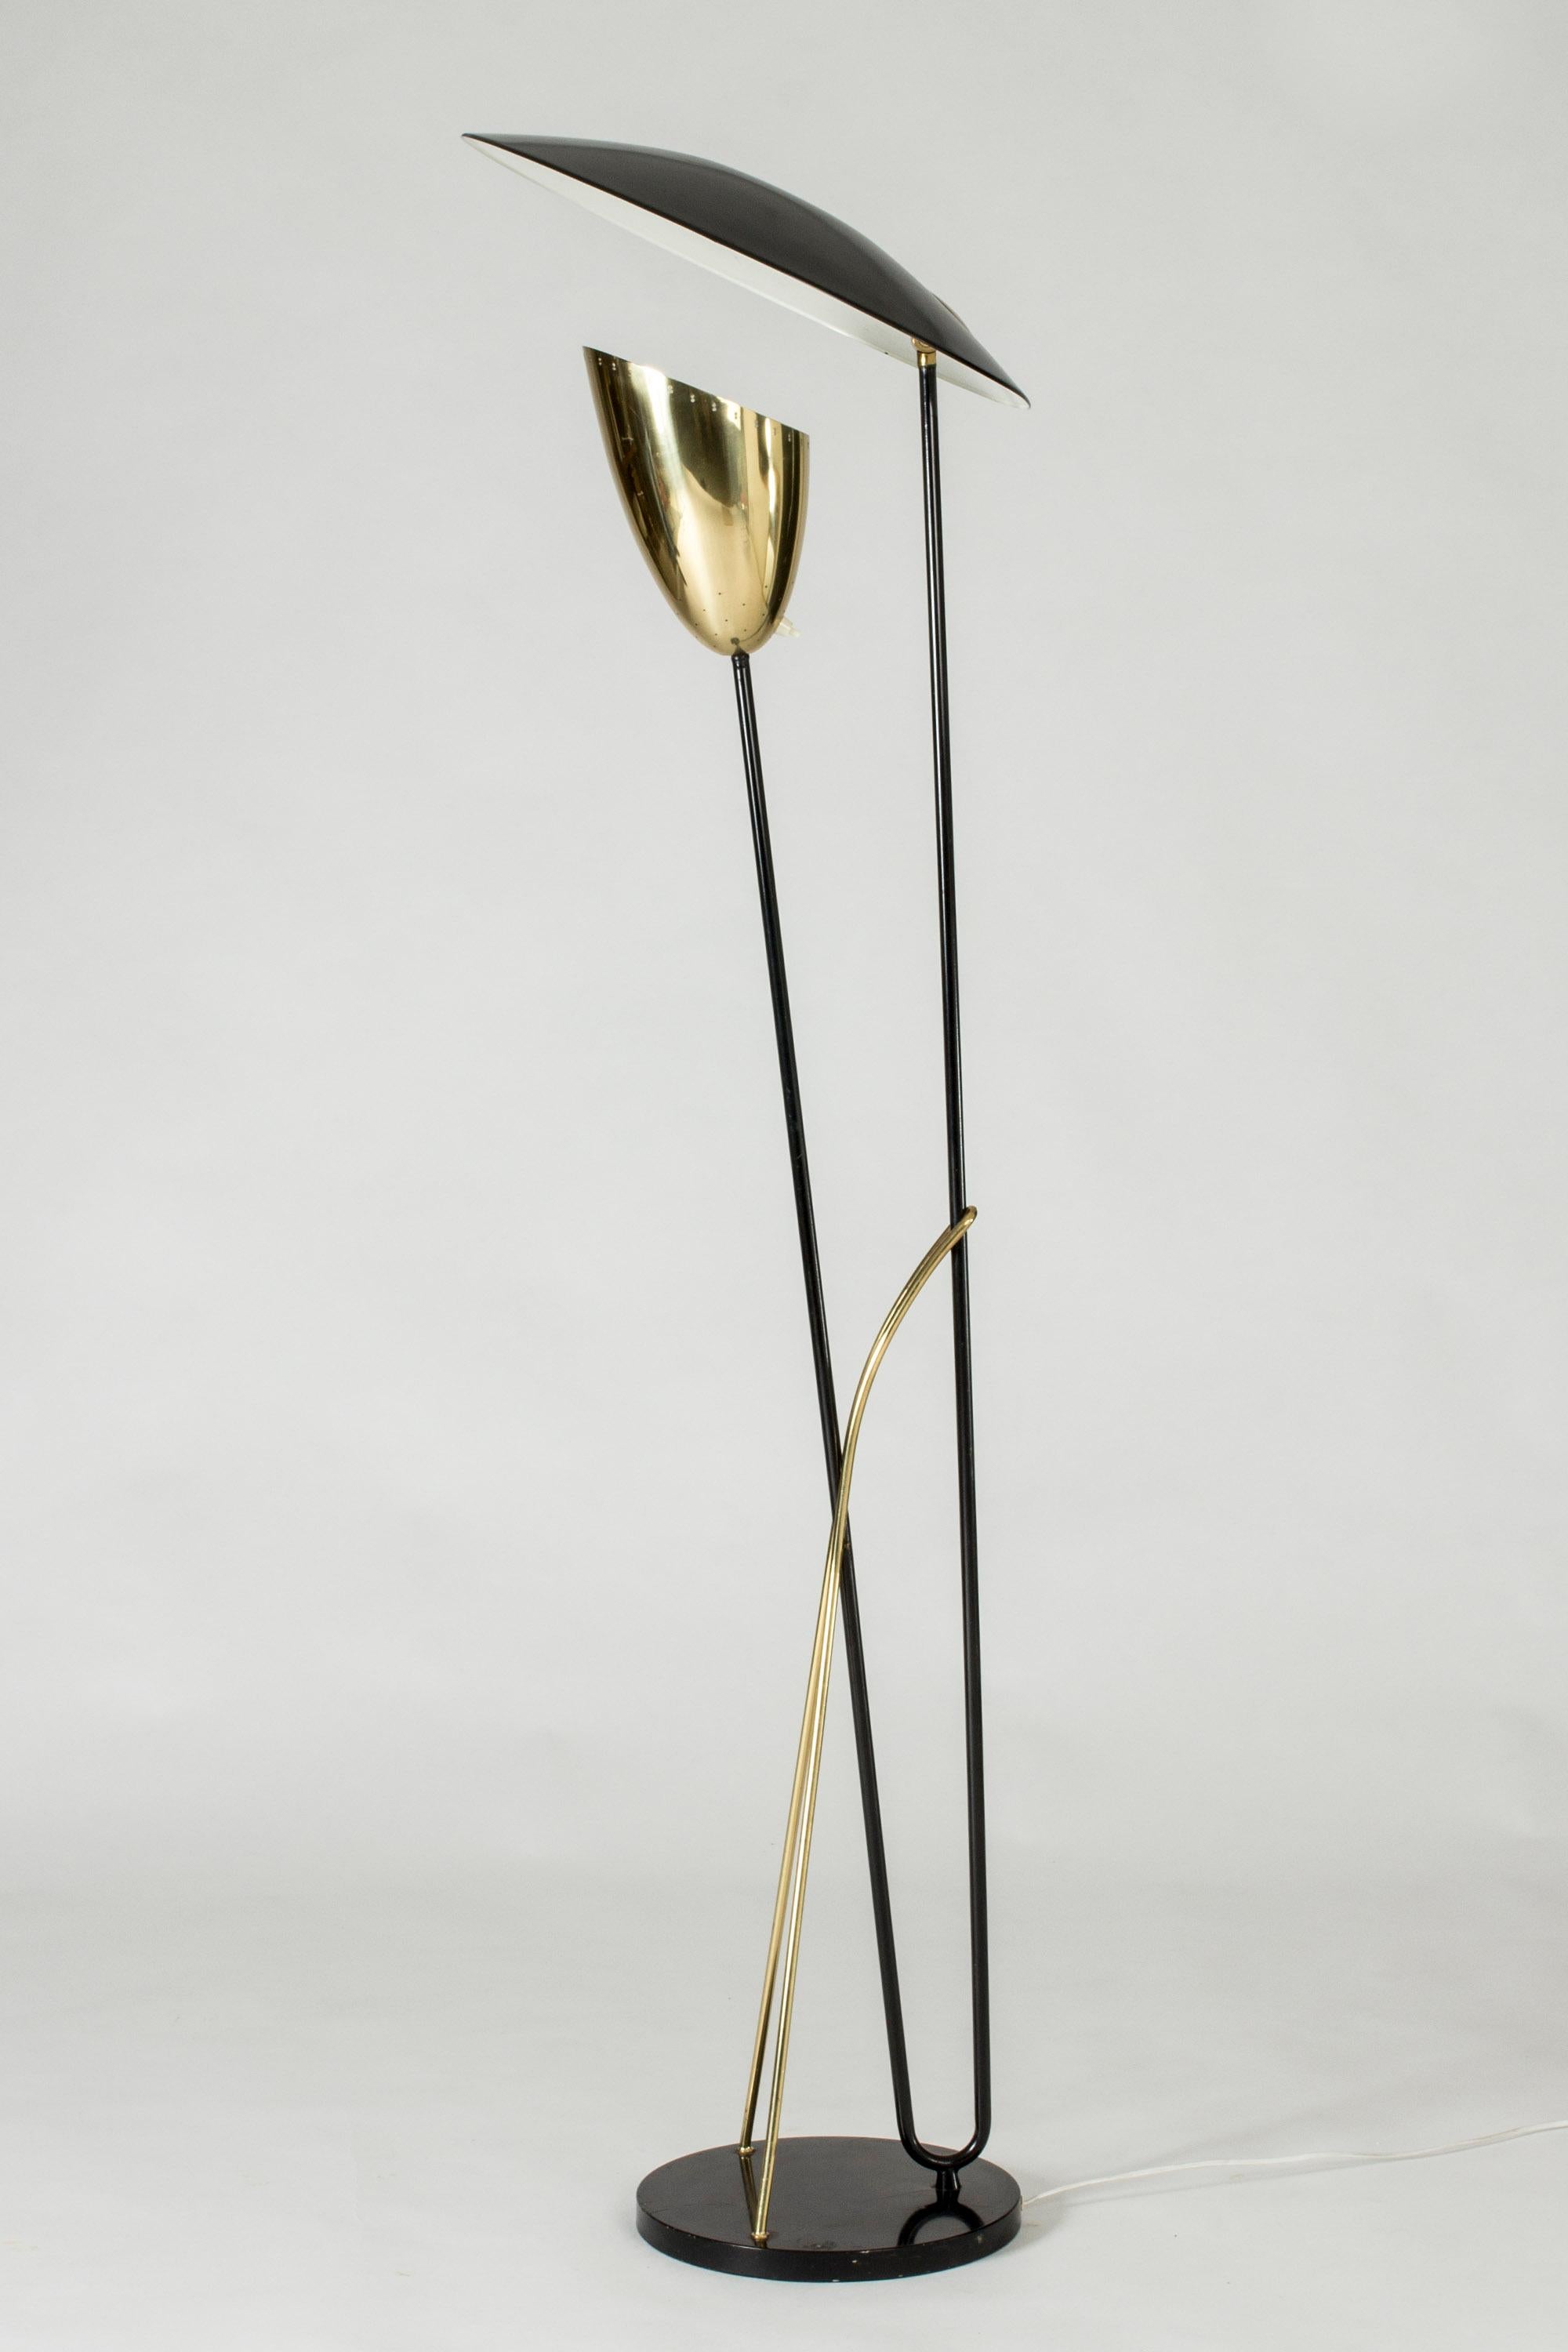 Mid-20th Century Lacquered Metal and Brass Floor Lamp by Svend Aage Holm Sørensen, Denmark For Sale